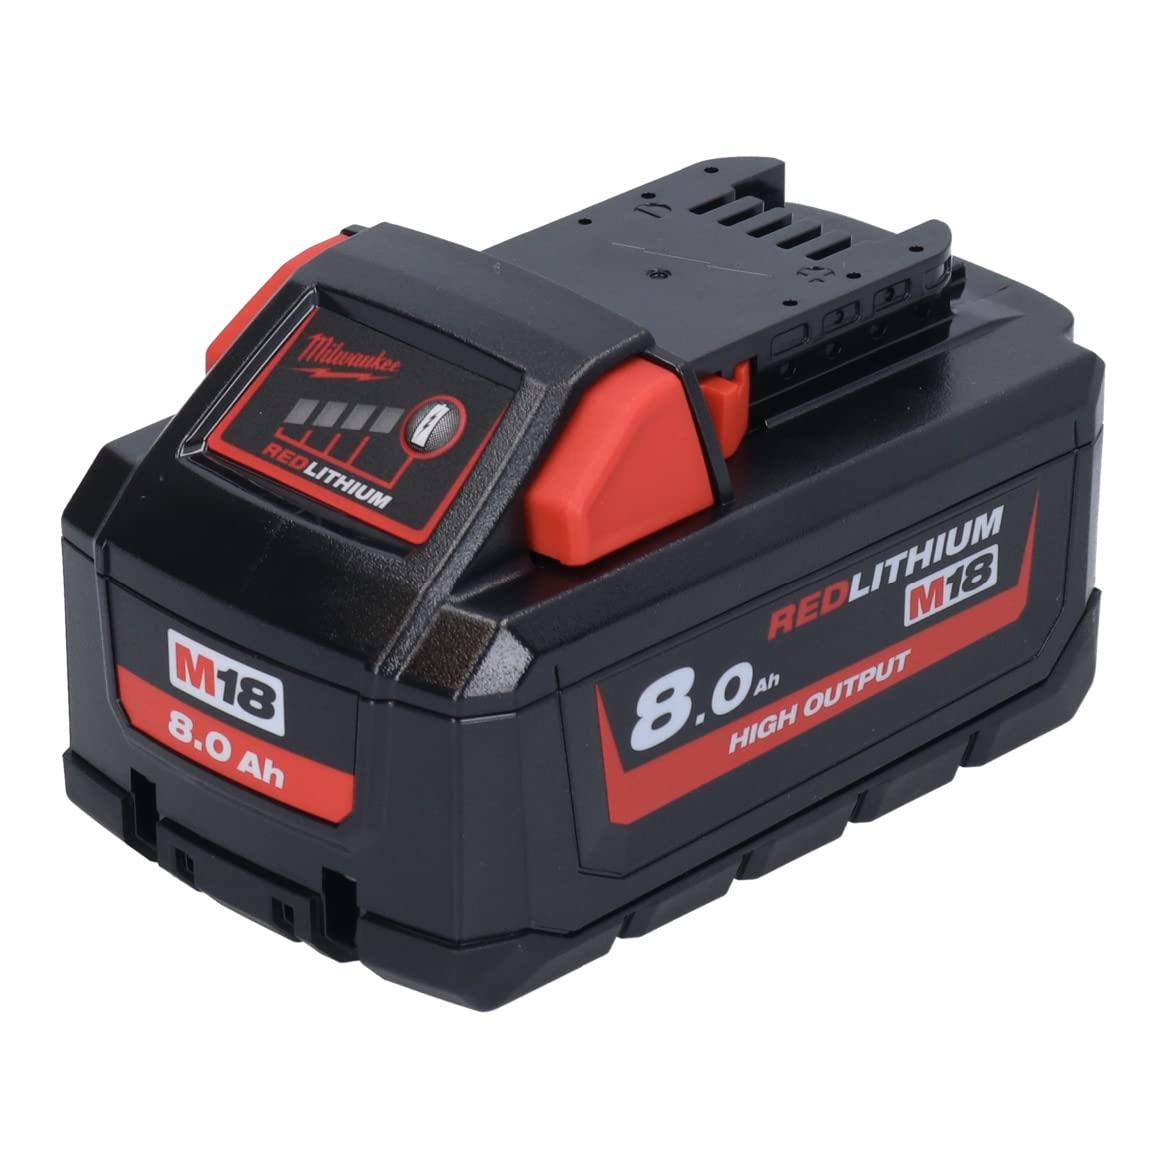 Batterie M18 HB8 18V 8AH High -Output Red Lithium Milwaukee - 4932471070